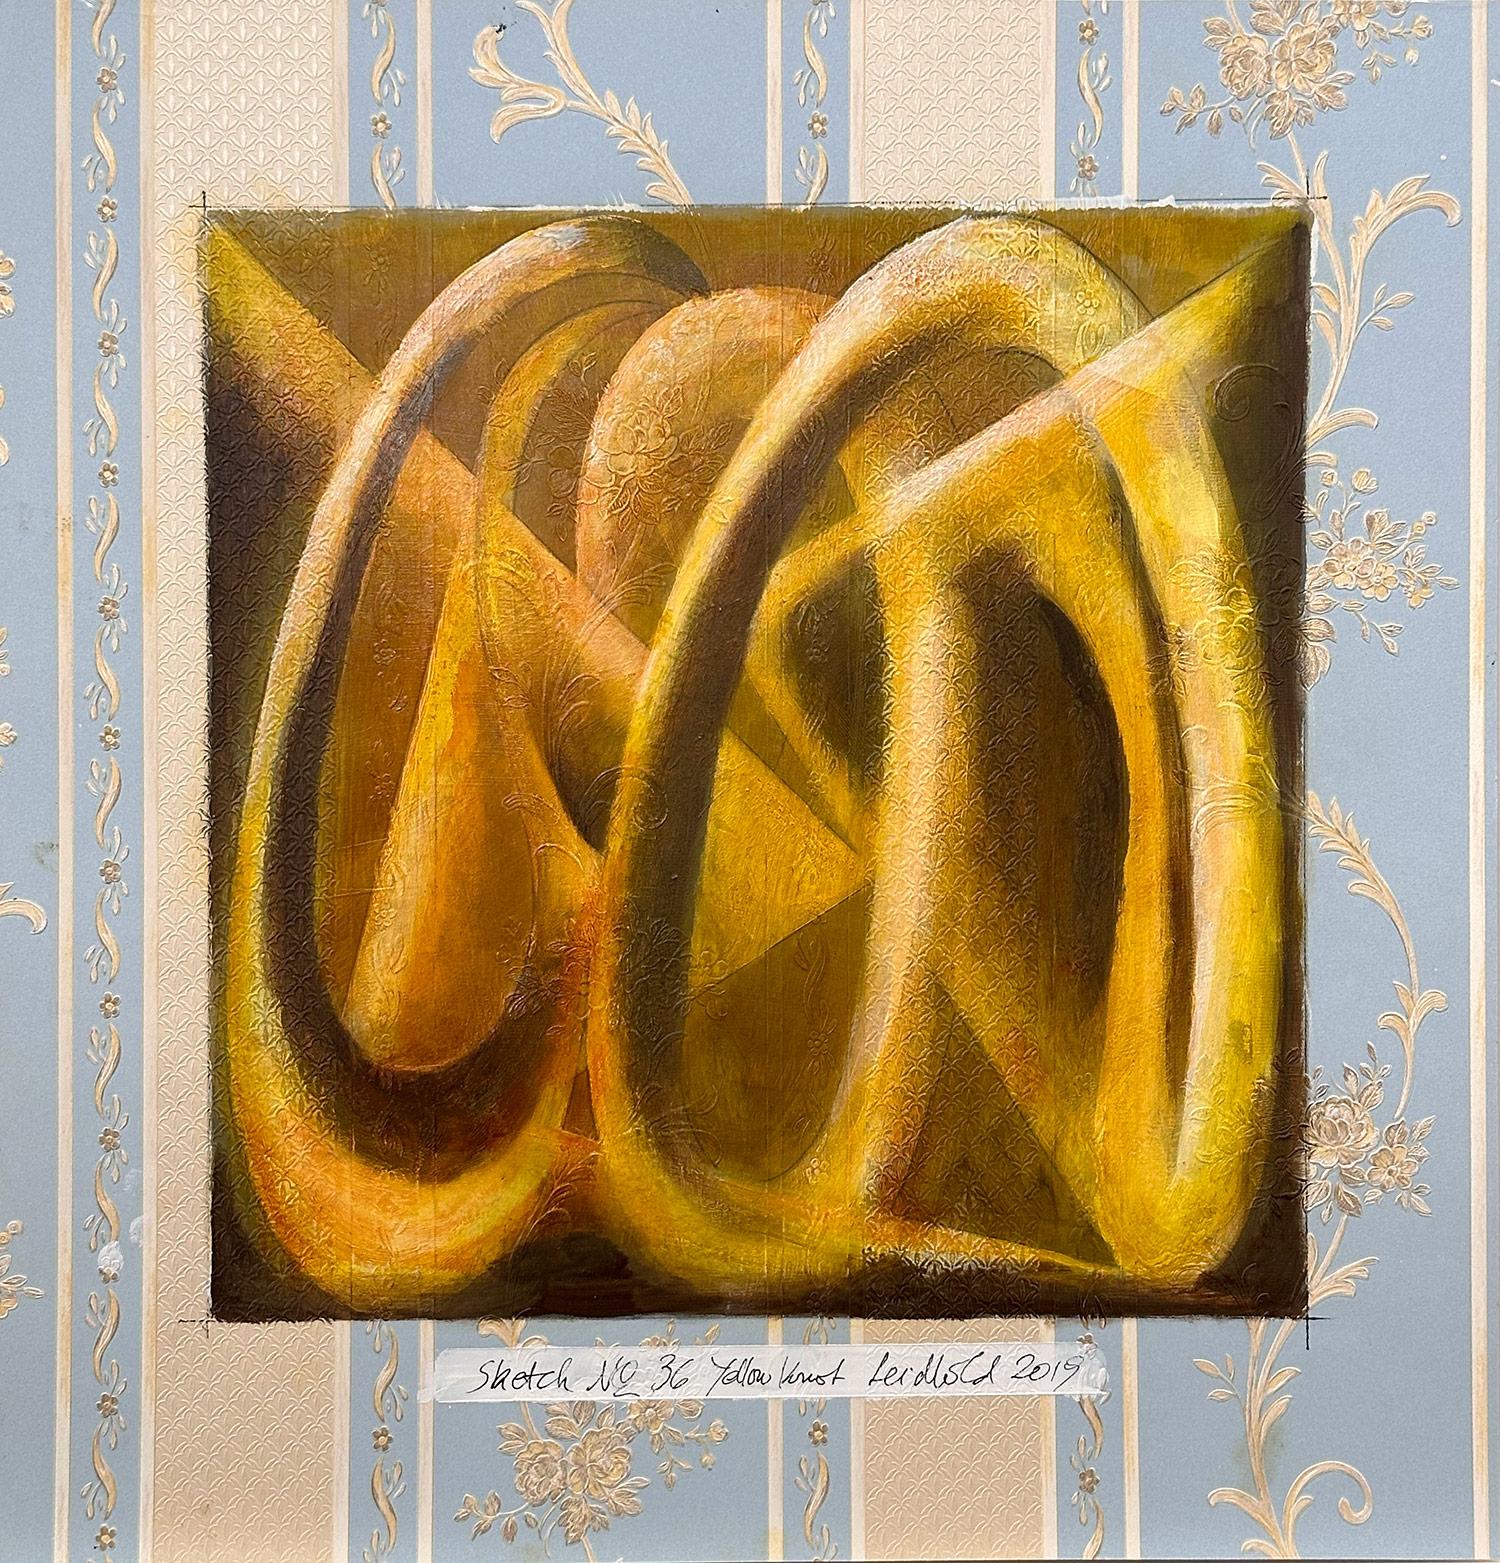 Wolfgang Leidhold Abstract Painting – „Sketch No.36 Yellow Knot“ Abstraktes, gegenständliches Gemälde auf Tapete